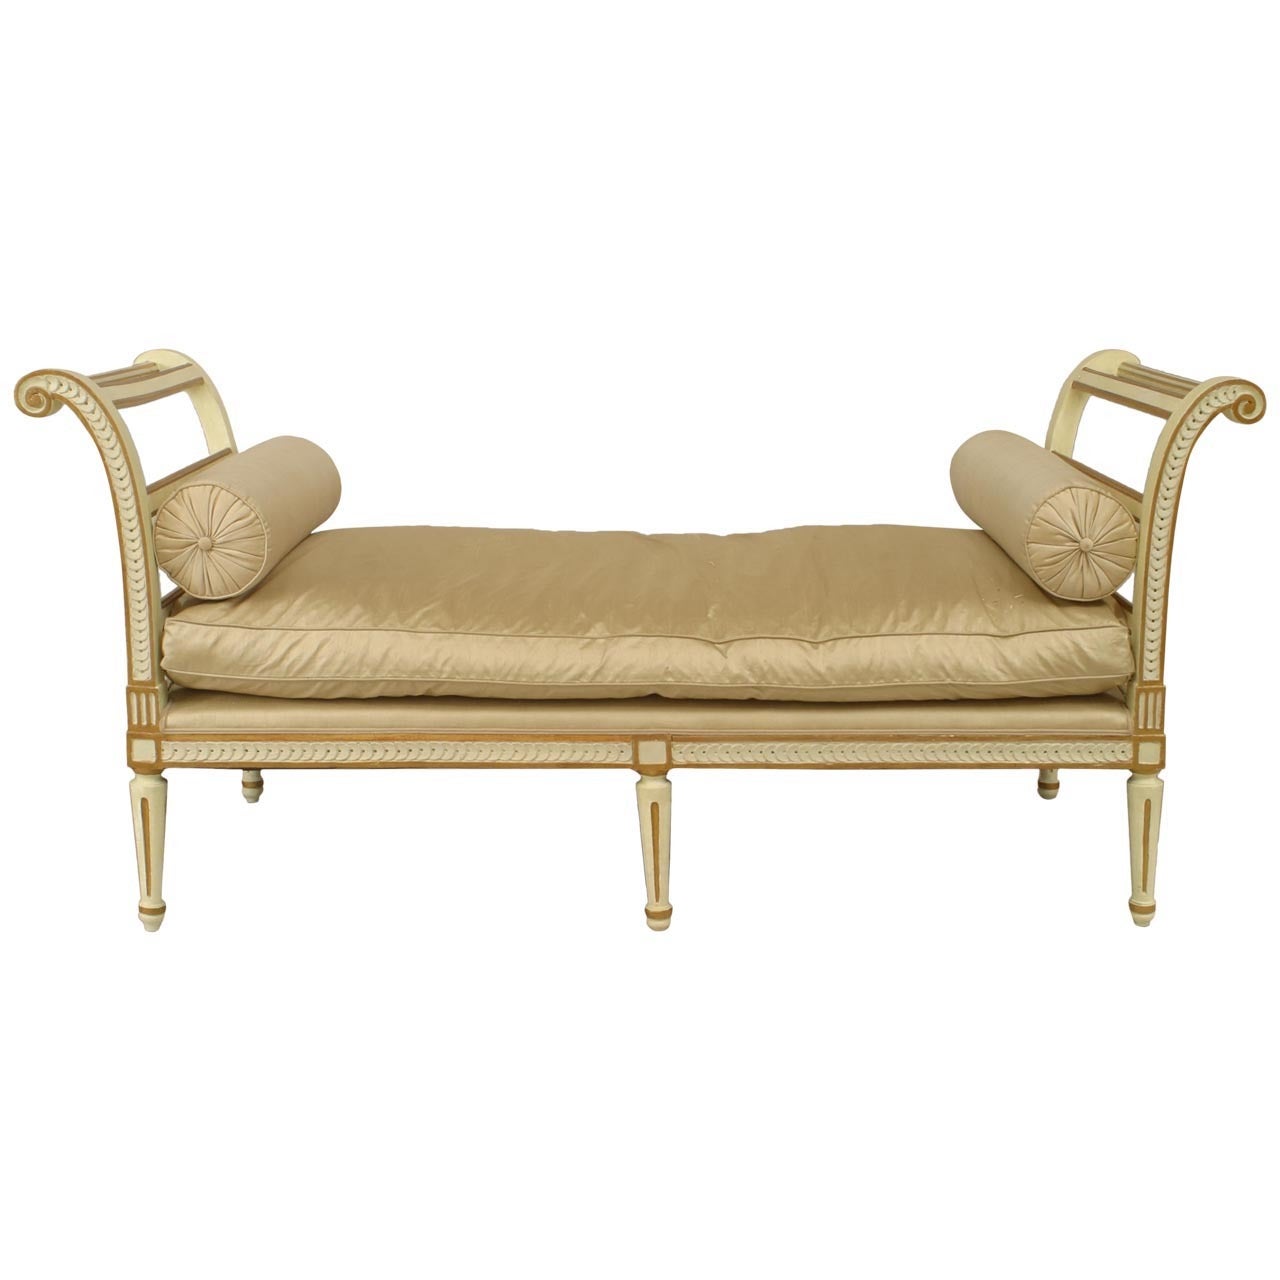 Italian Neo-Classic Style Upholstered Daybed